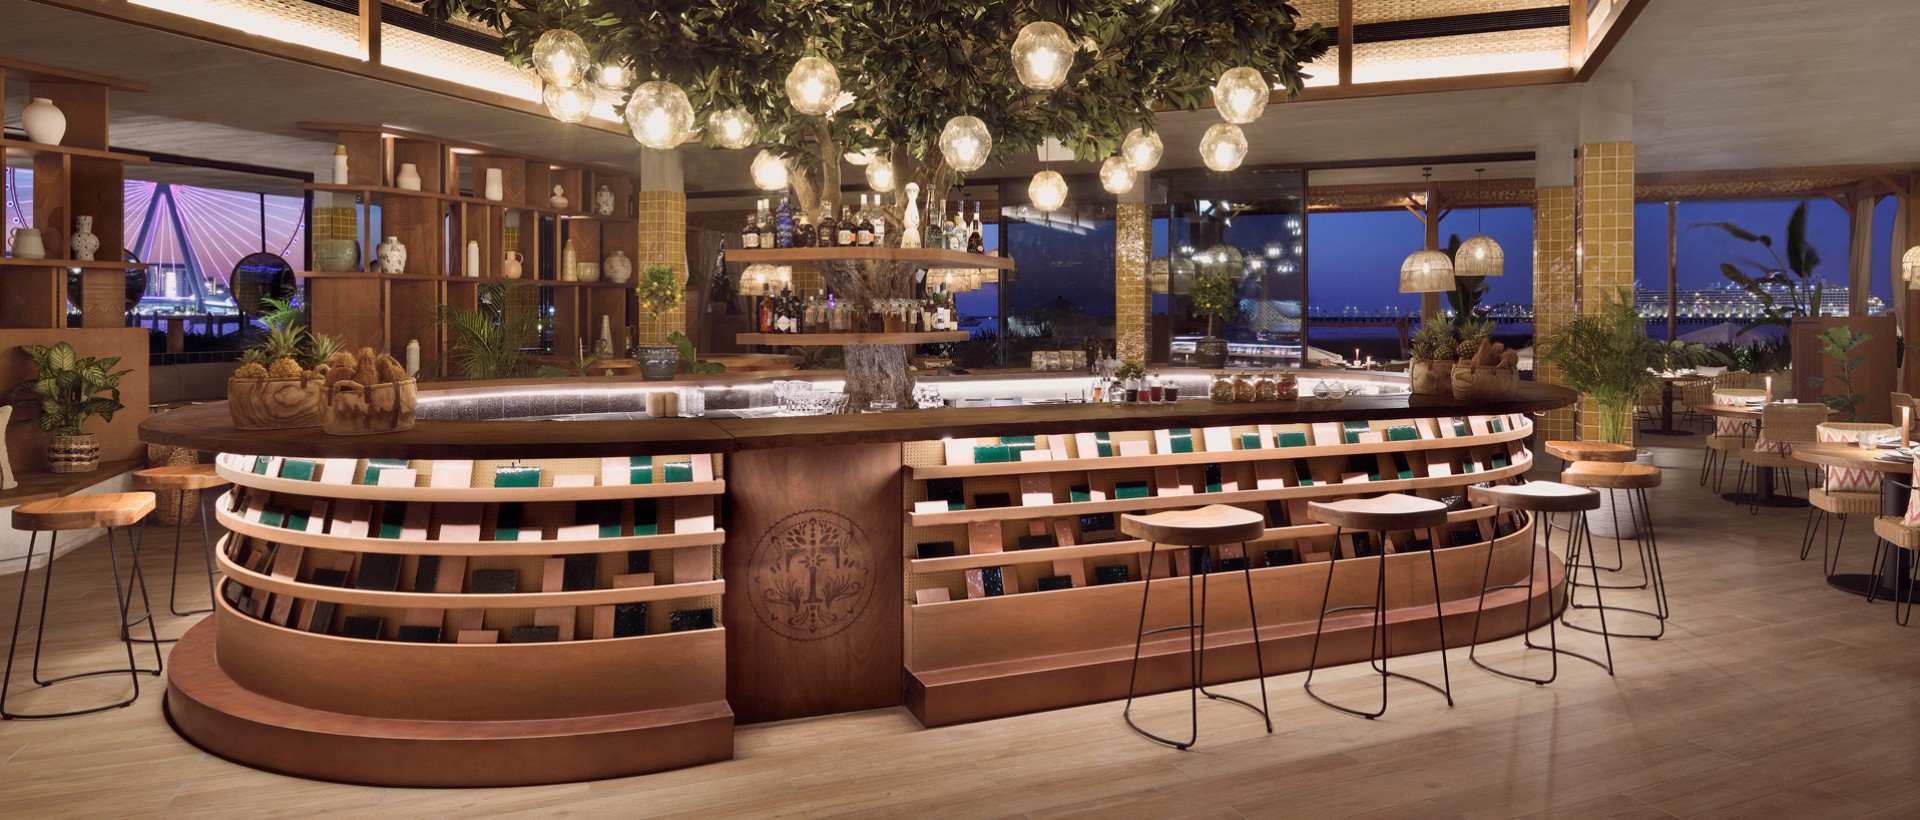 a bar with wooden features and a tree in the middle